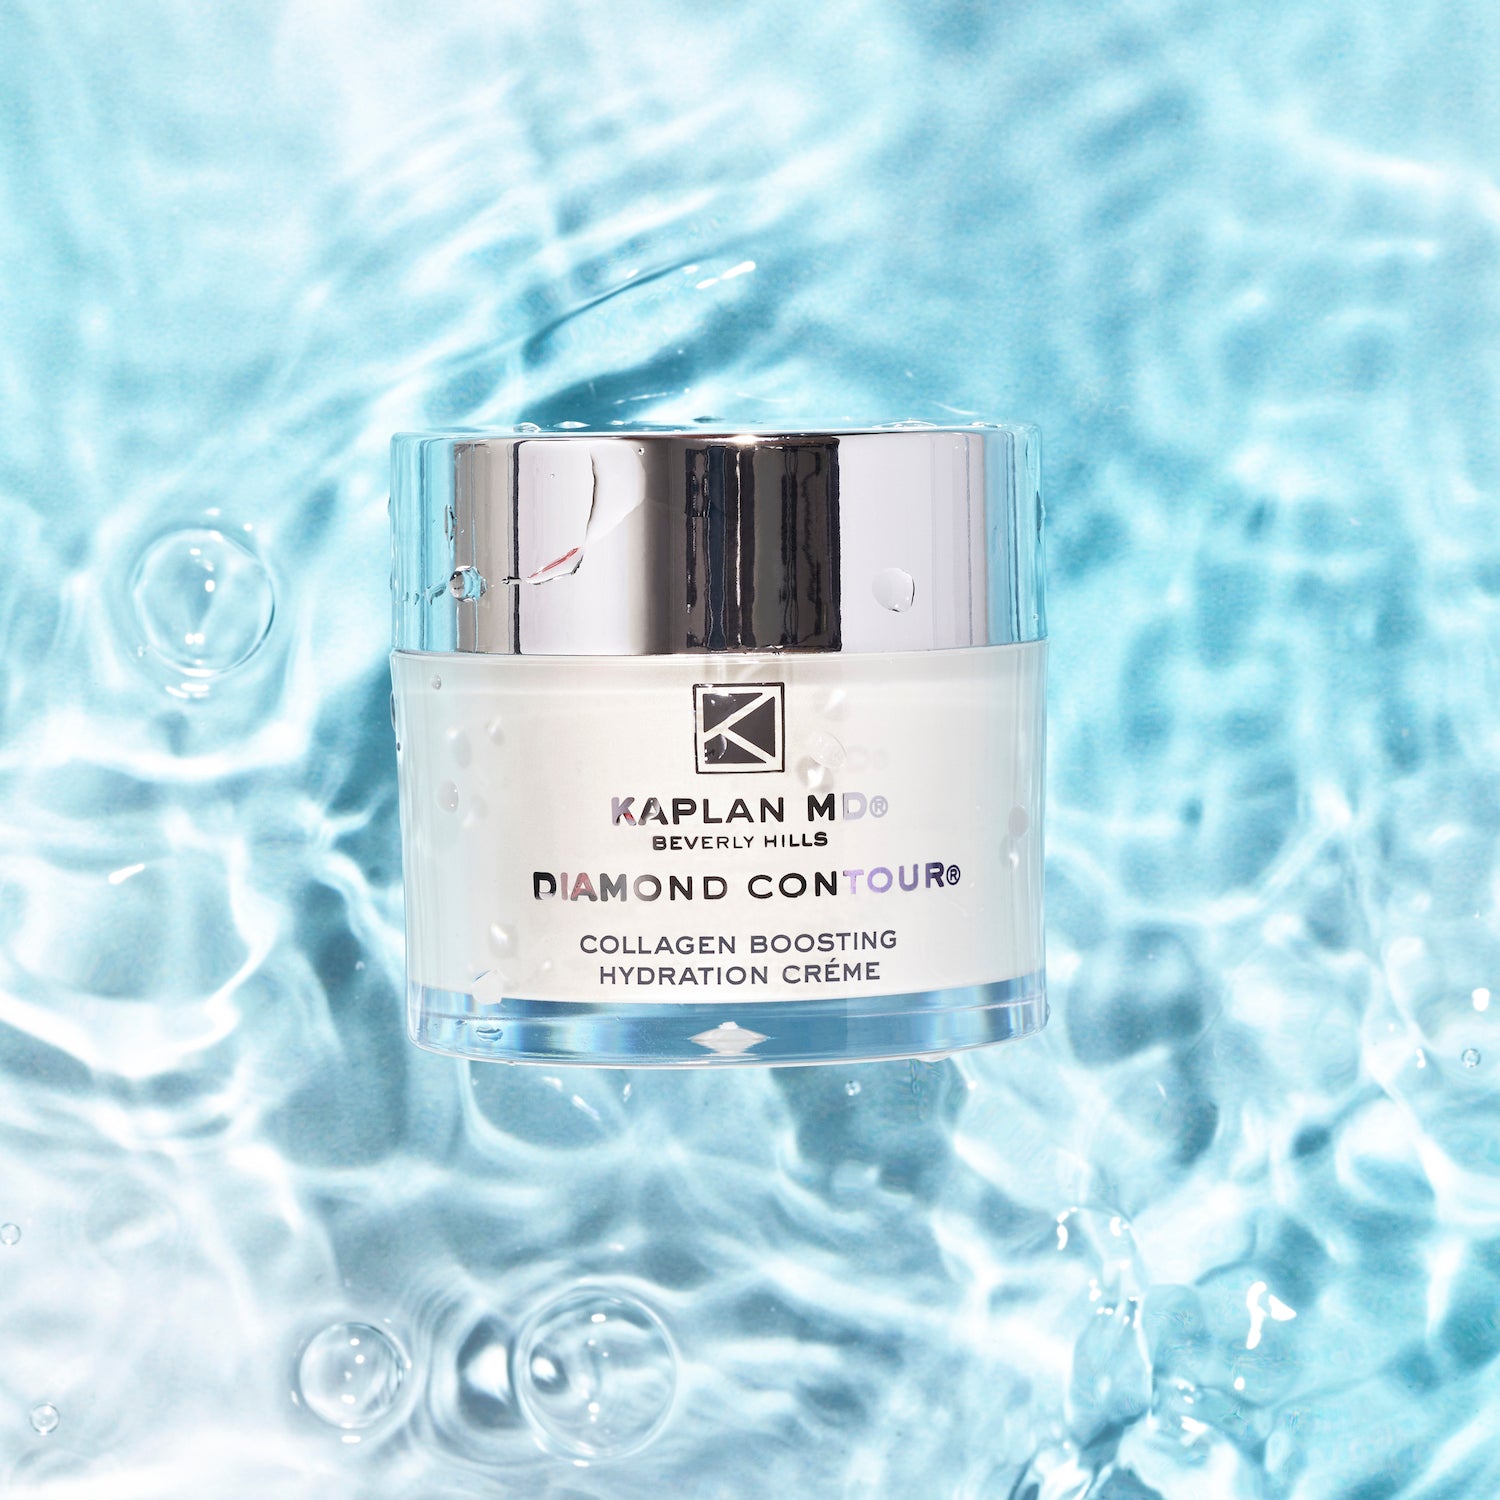 Give your skin a deep hit of moisture to help repair it from summer season damage using this Collagen Boosting Hydration Cream